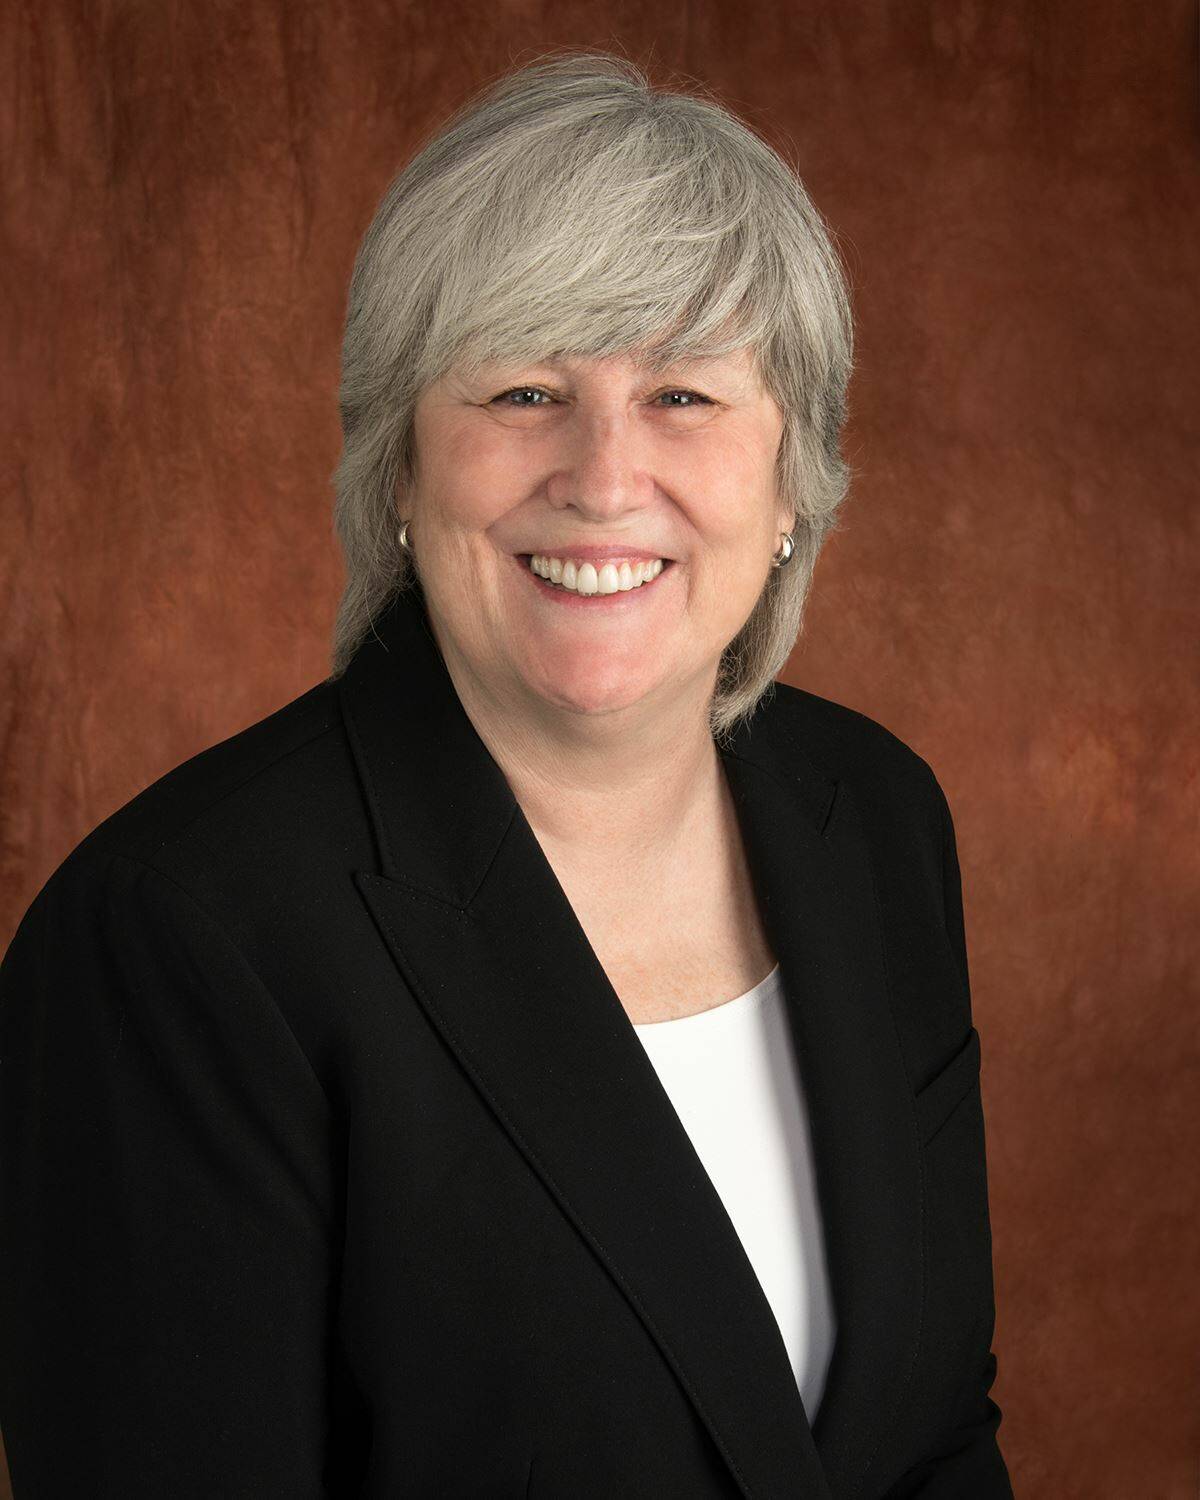 Courtesy photo
Snoqualmie City Councilmember Peggy Shepard is running for mayor of Snoqualmie.